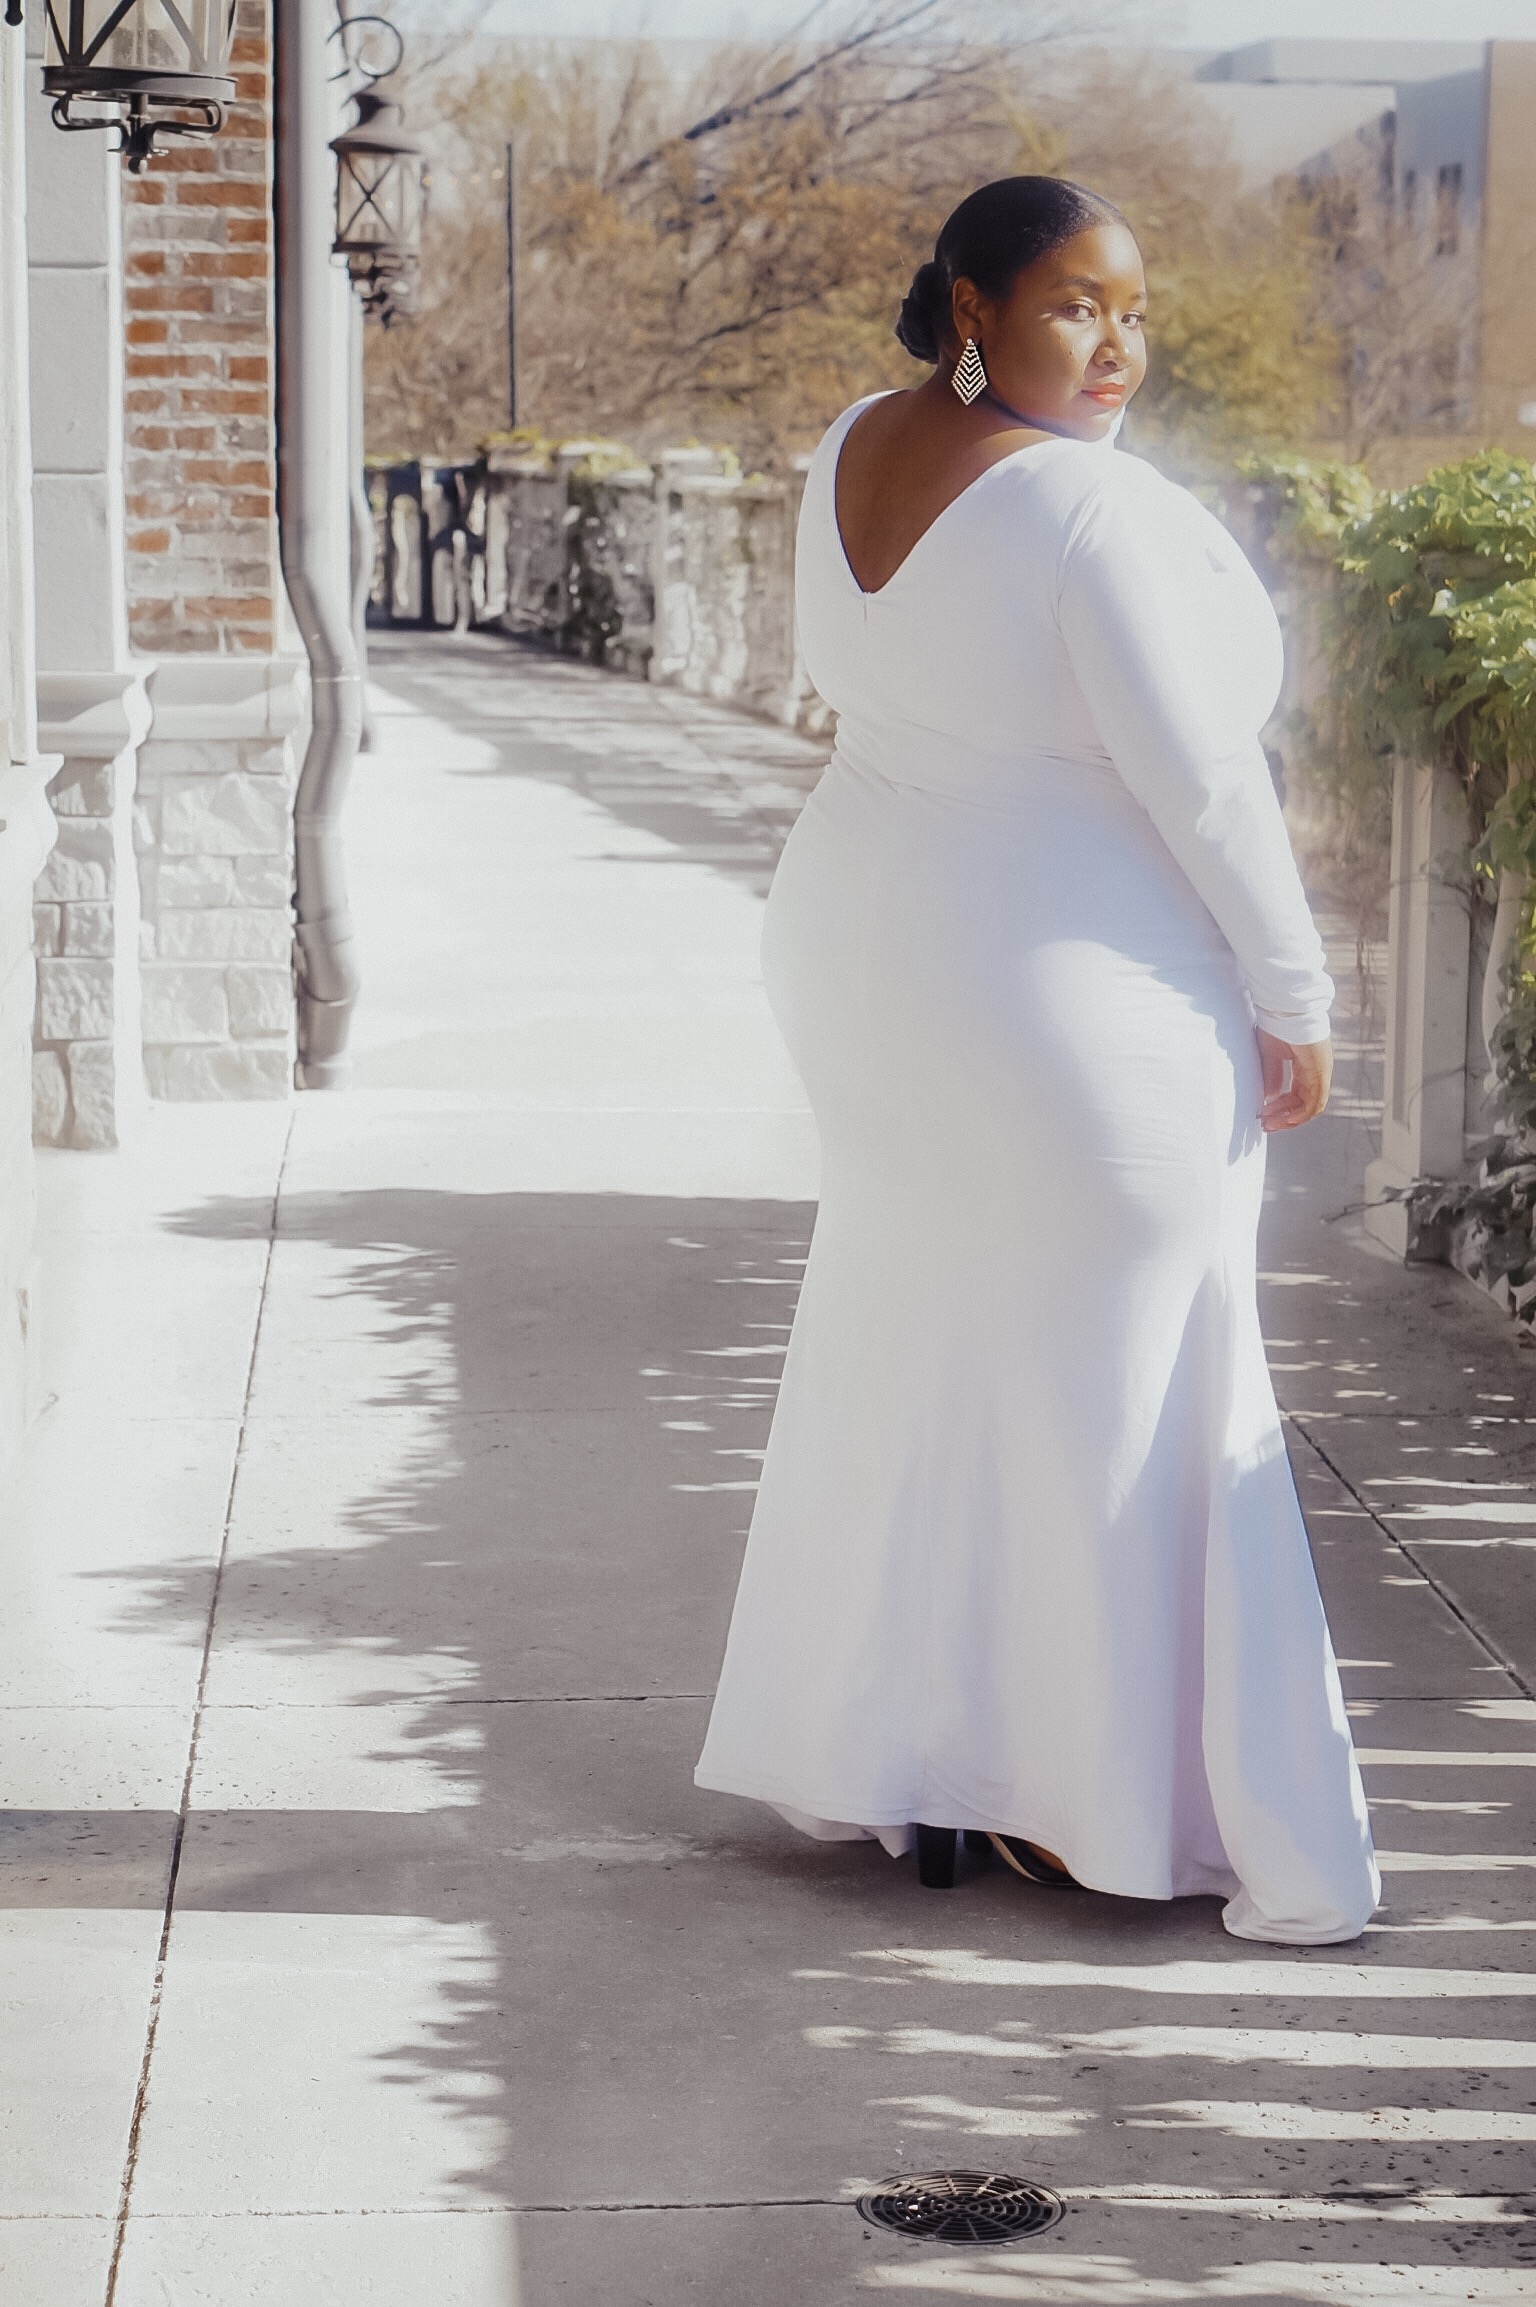 20 Plus Size Wedding Dresses Under $500 - From Head To Curve